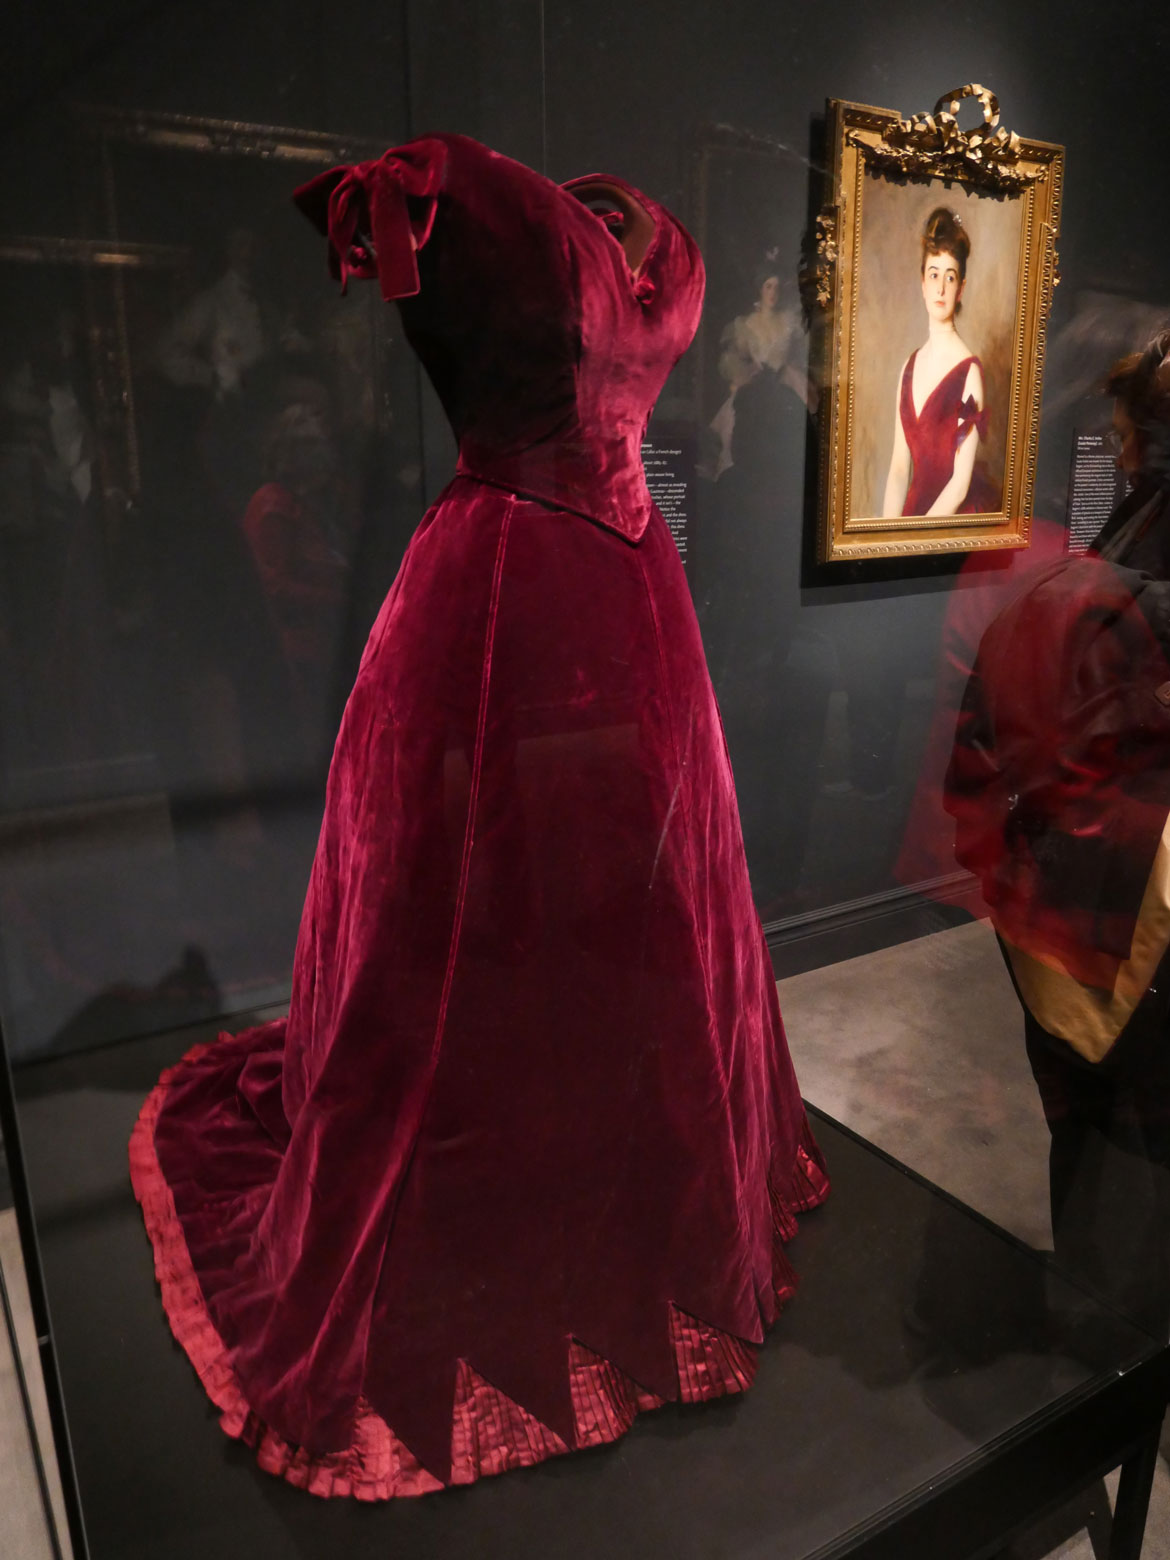 Silk velvet evening dress and John Singer Sargent, "Mrs. Charles E. Inches (Louise Pomeroy)," 1887, oil on canvas, in "Fashioned by Sargent" at Museum of Fine Arts, Boston, 2023 to 2024. (©Greg Cook photo)